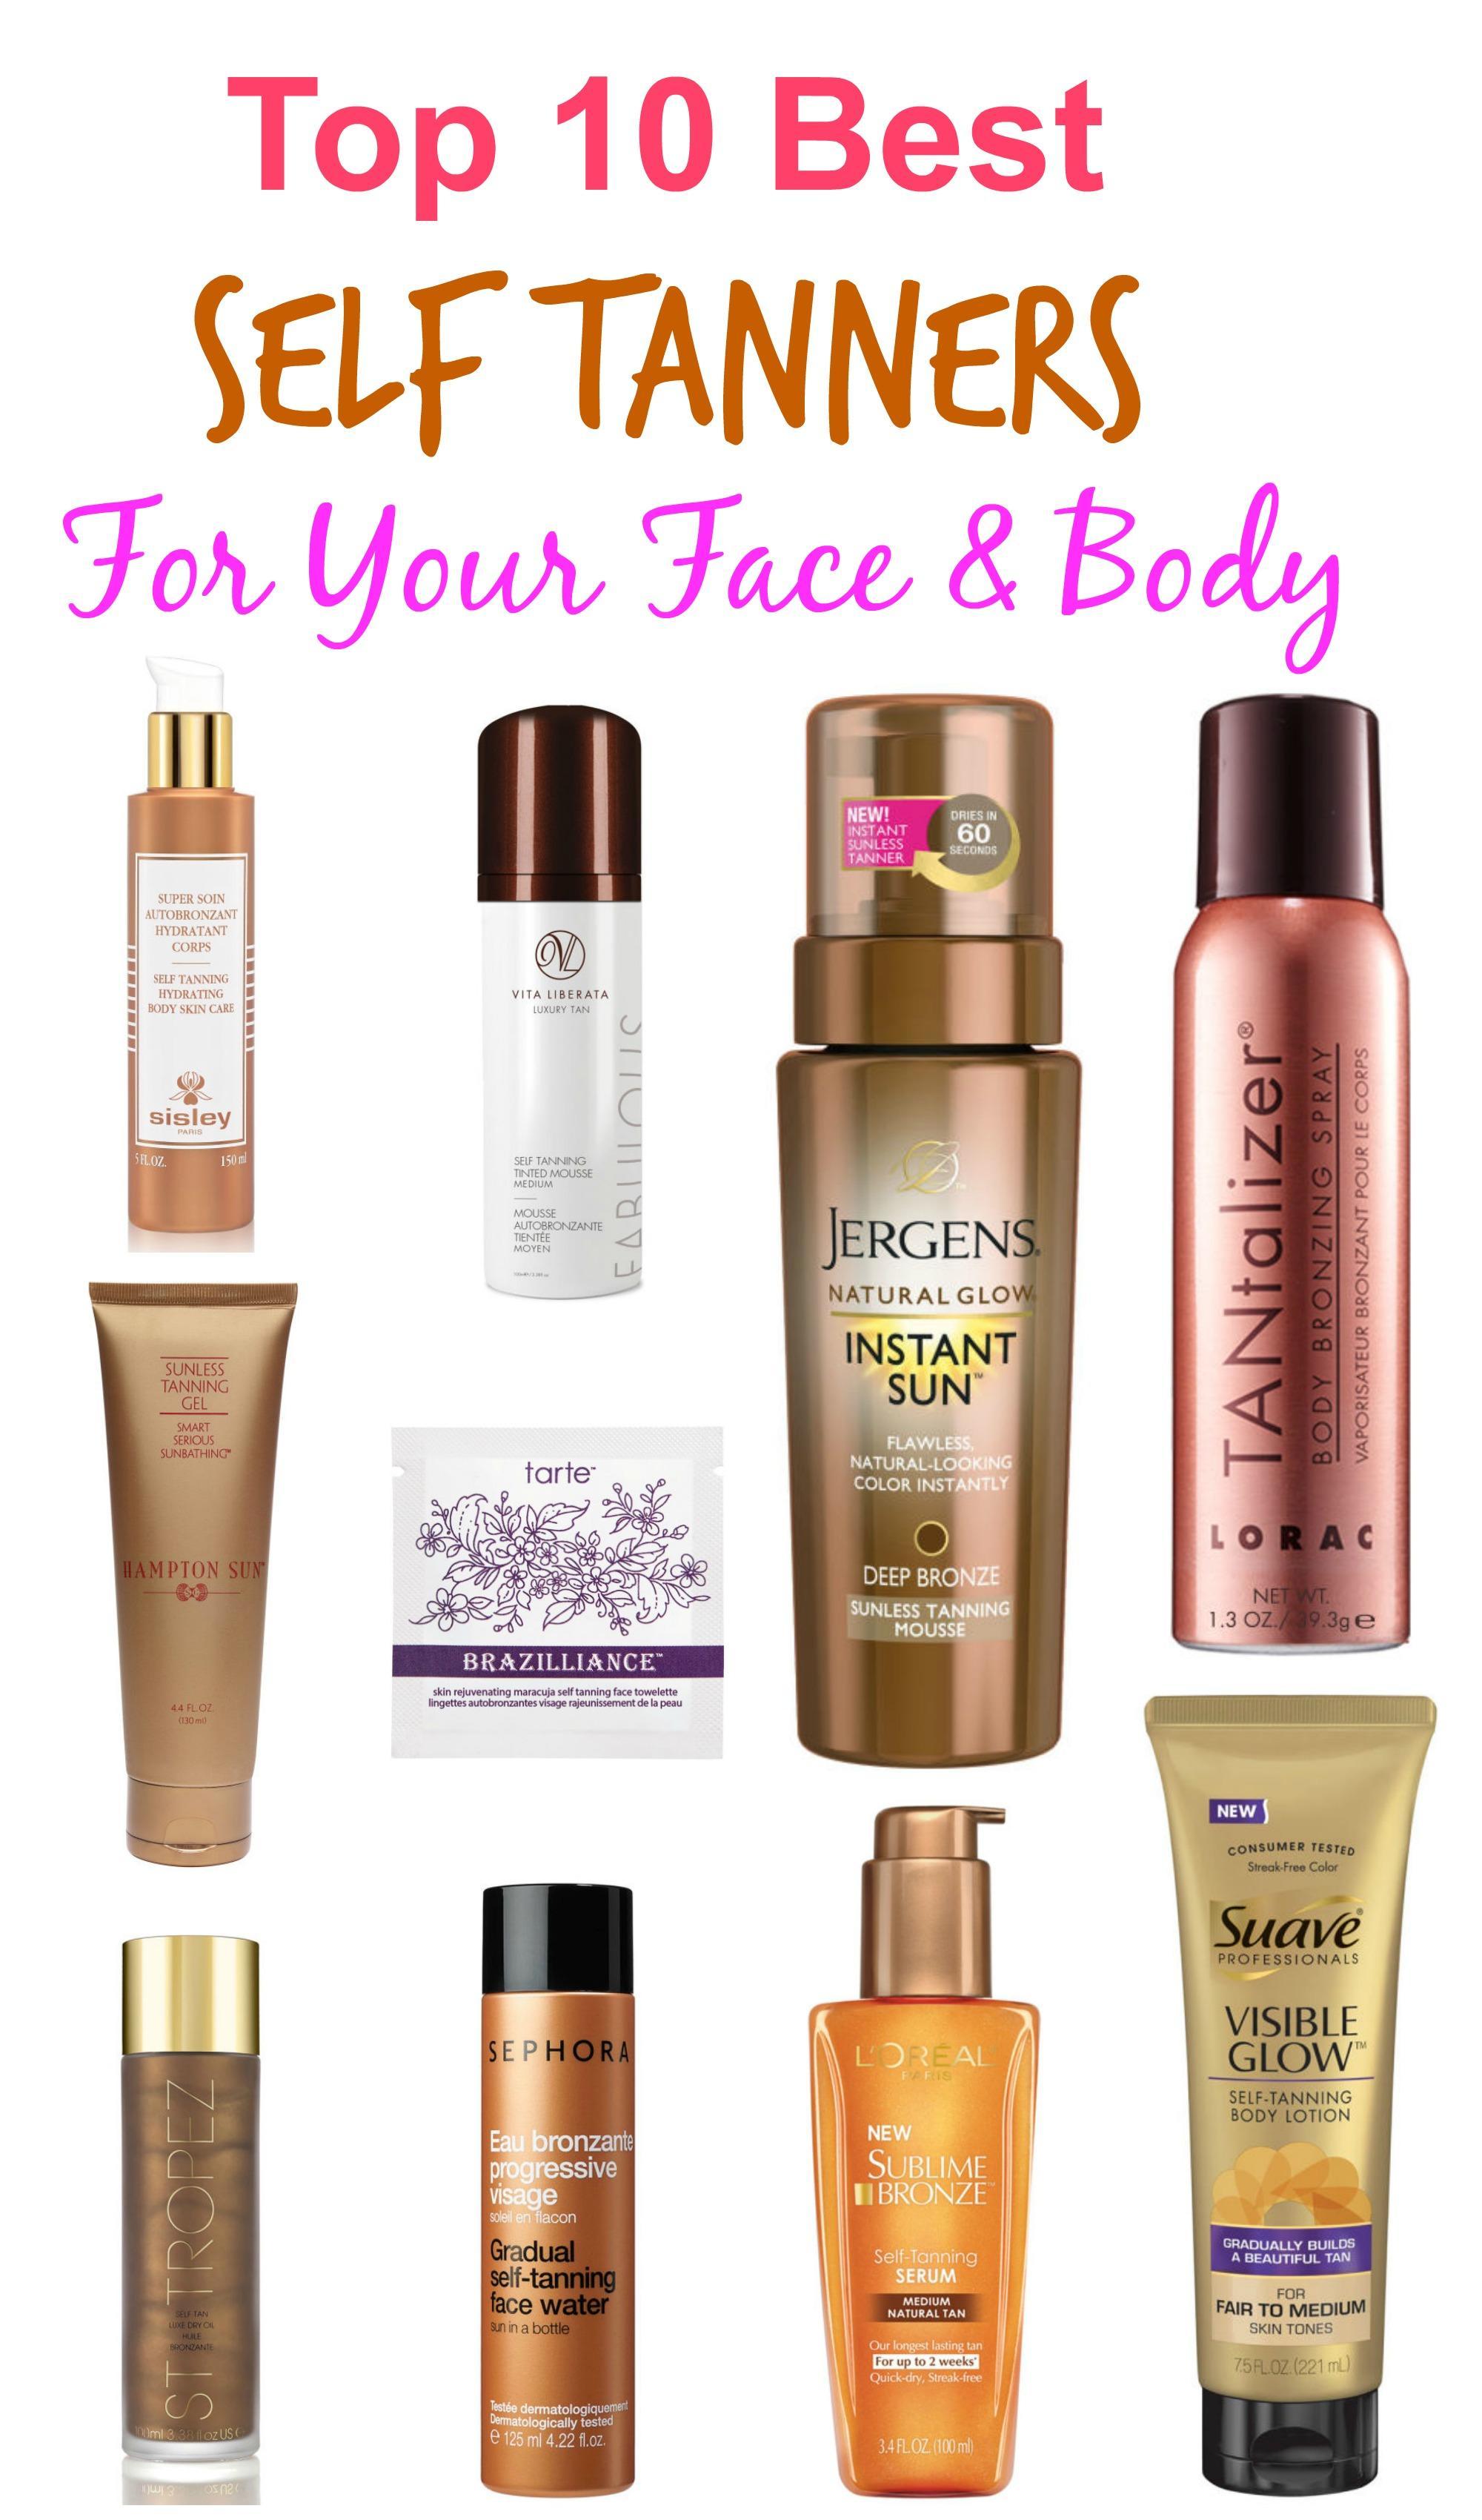 10 Best Self Tanners For Your Face and Body